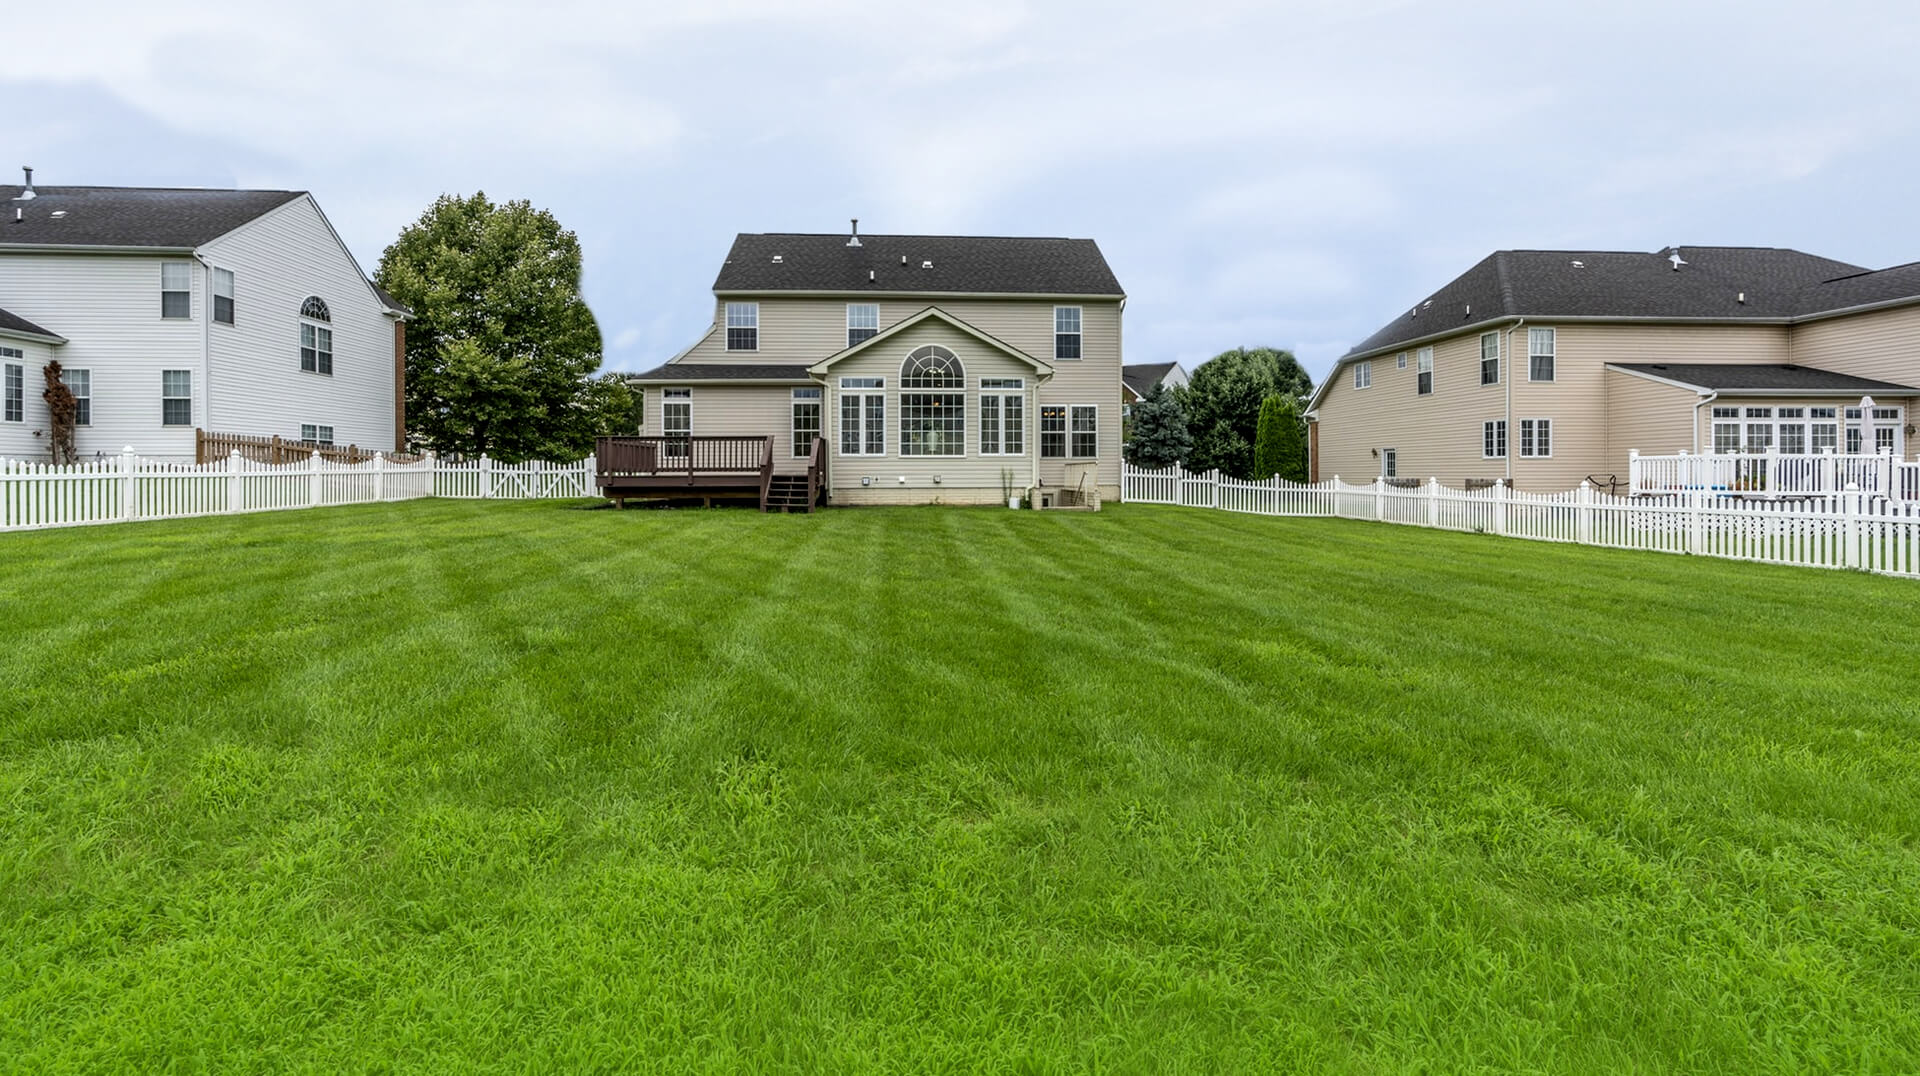 House with beautiful lawn